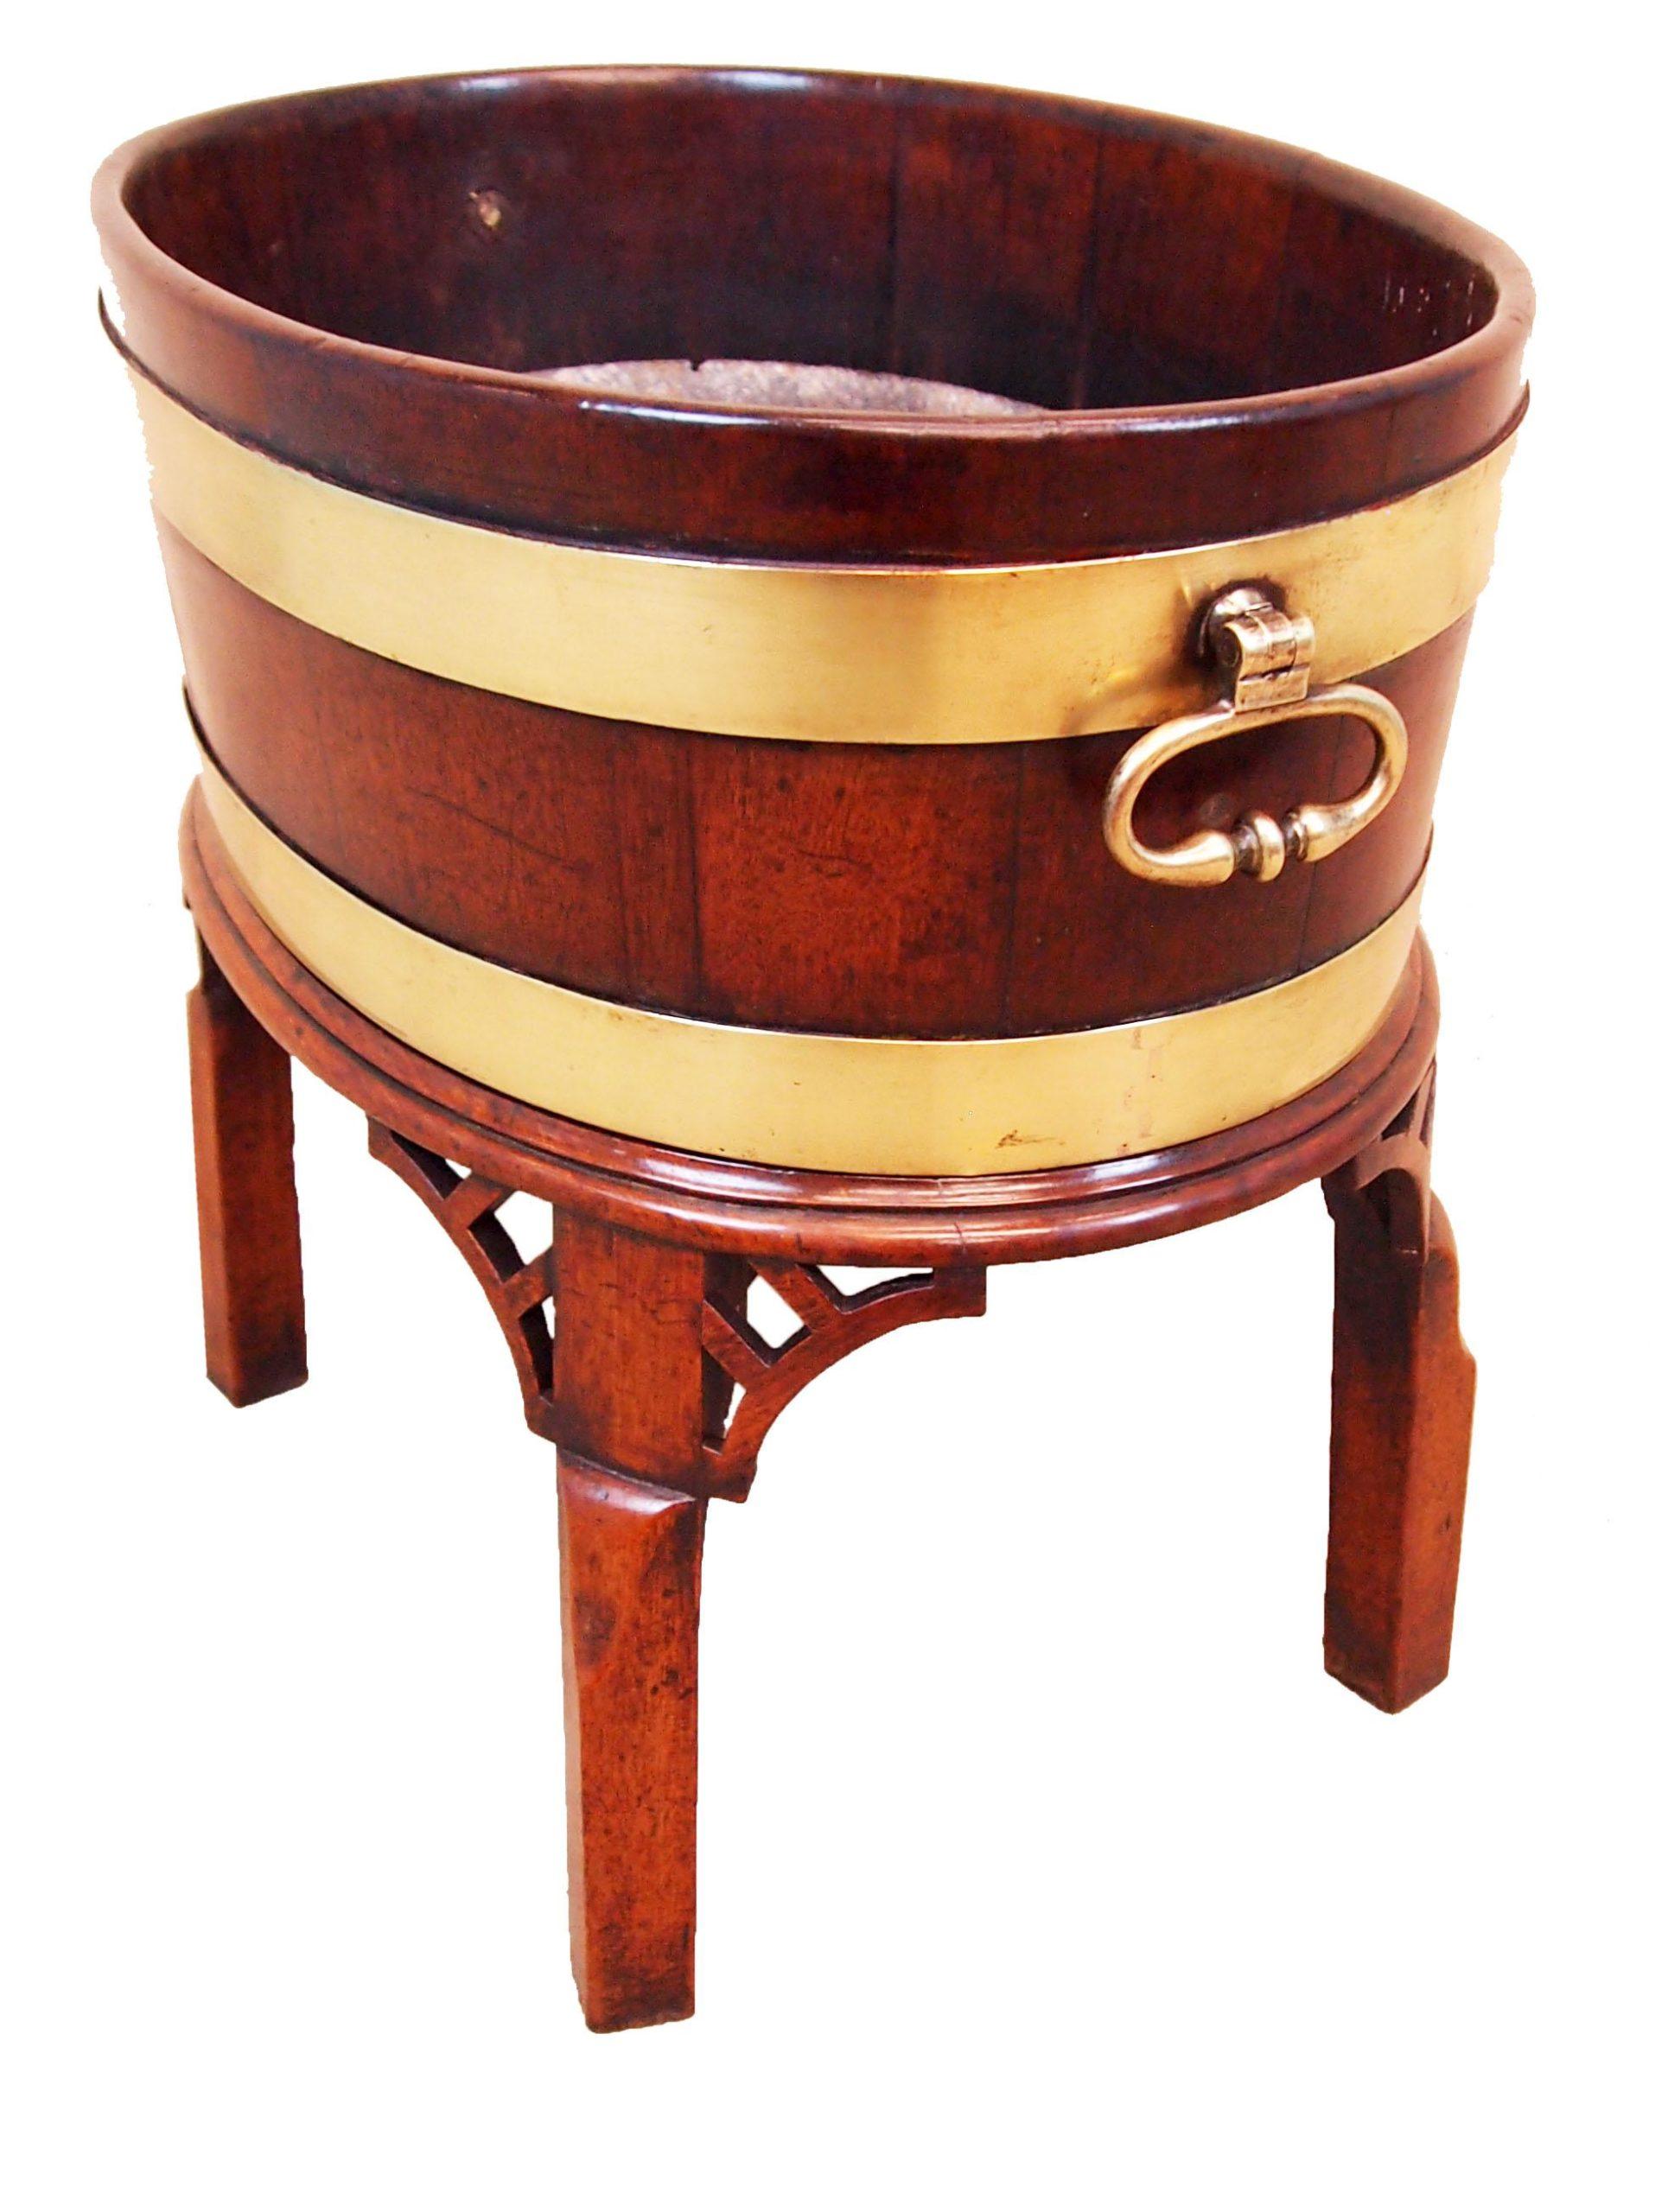 18th century (George I) English mahogany oval open wine cooler with original brass bound decoration and original brass carrying handles resting on its original square legs stand with pierced corner brackets.
     